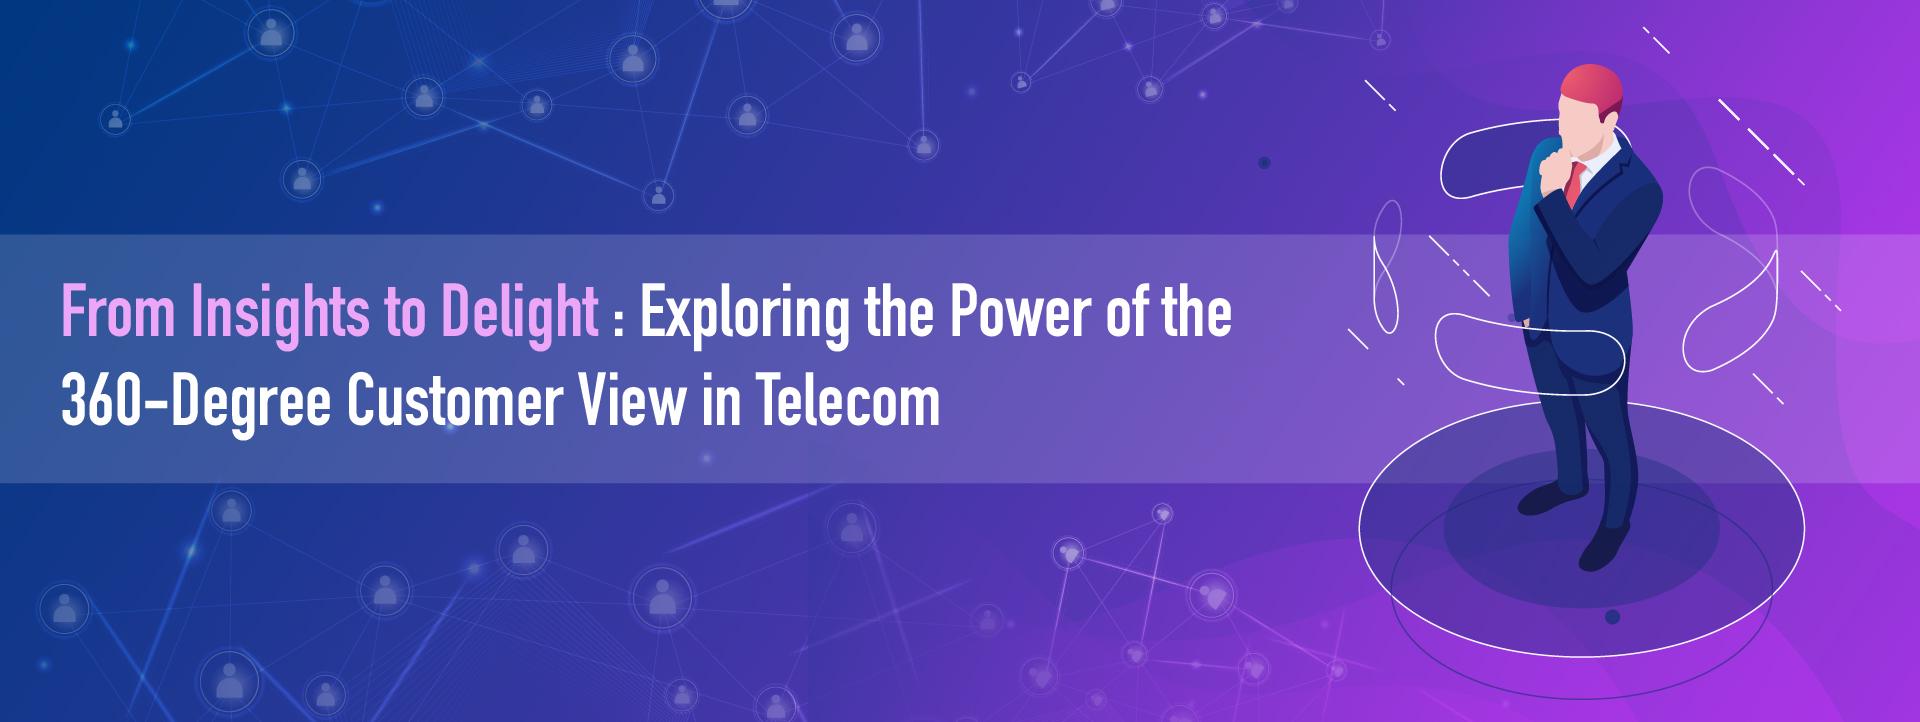 From Insights to Delight: Exploring the Power of the 360-Degree Customer View in Telecom